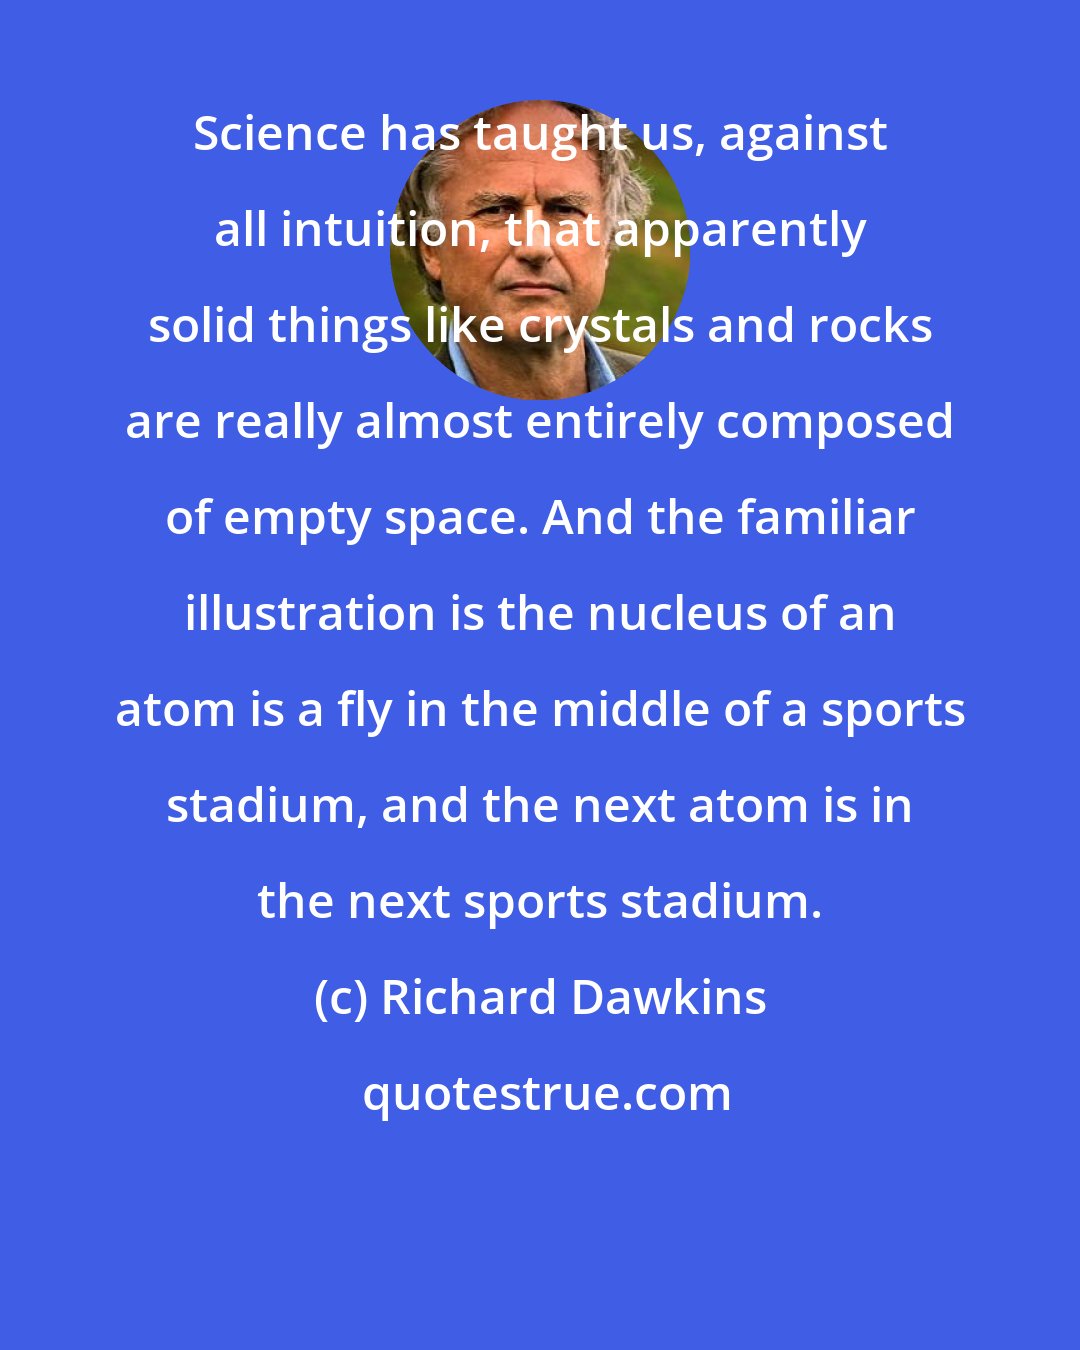 Richard Dawkins: Science has taught us, against all intuition, that apparently solid things like crystals and rocks are really almost entirely composed of empty space. And the familiar illustration is the nucleus of an atom is a fly in the middle of a sports stadium, and the next atom is in the next sports stadium.